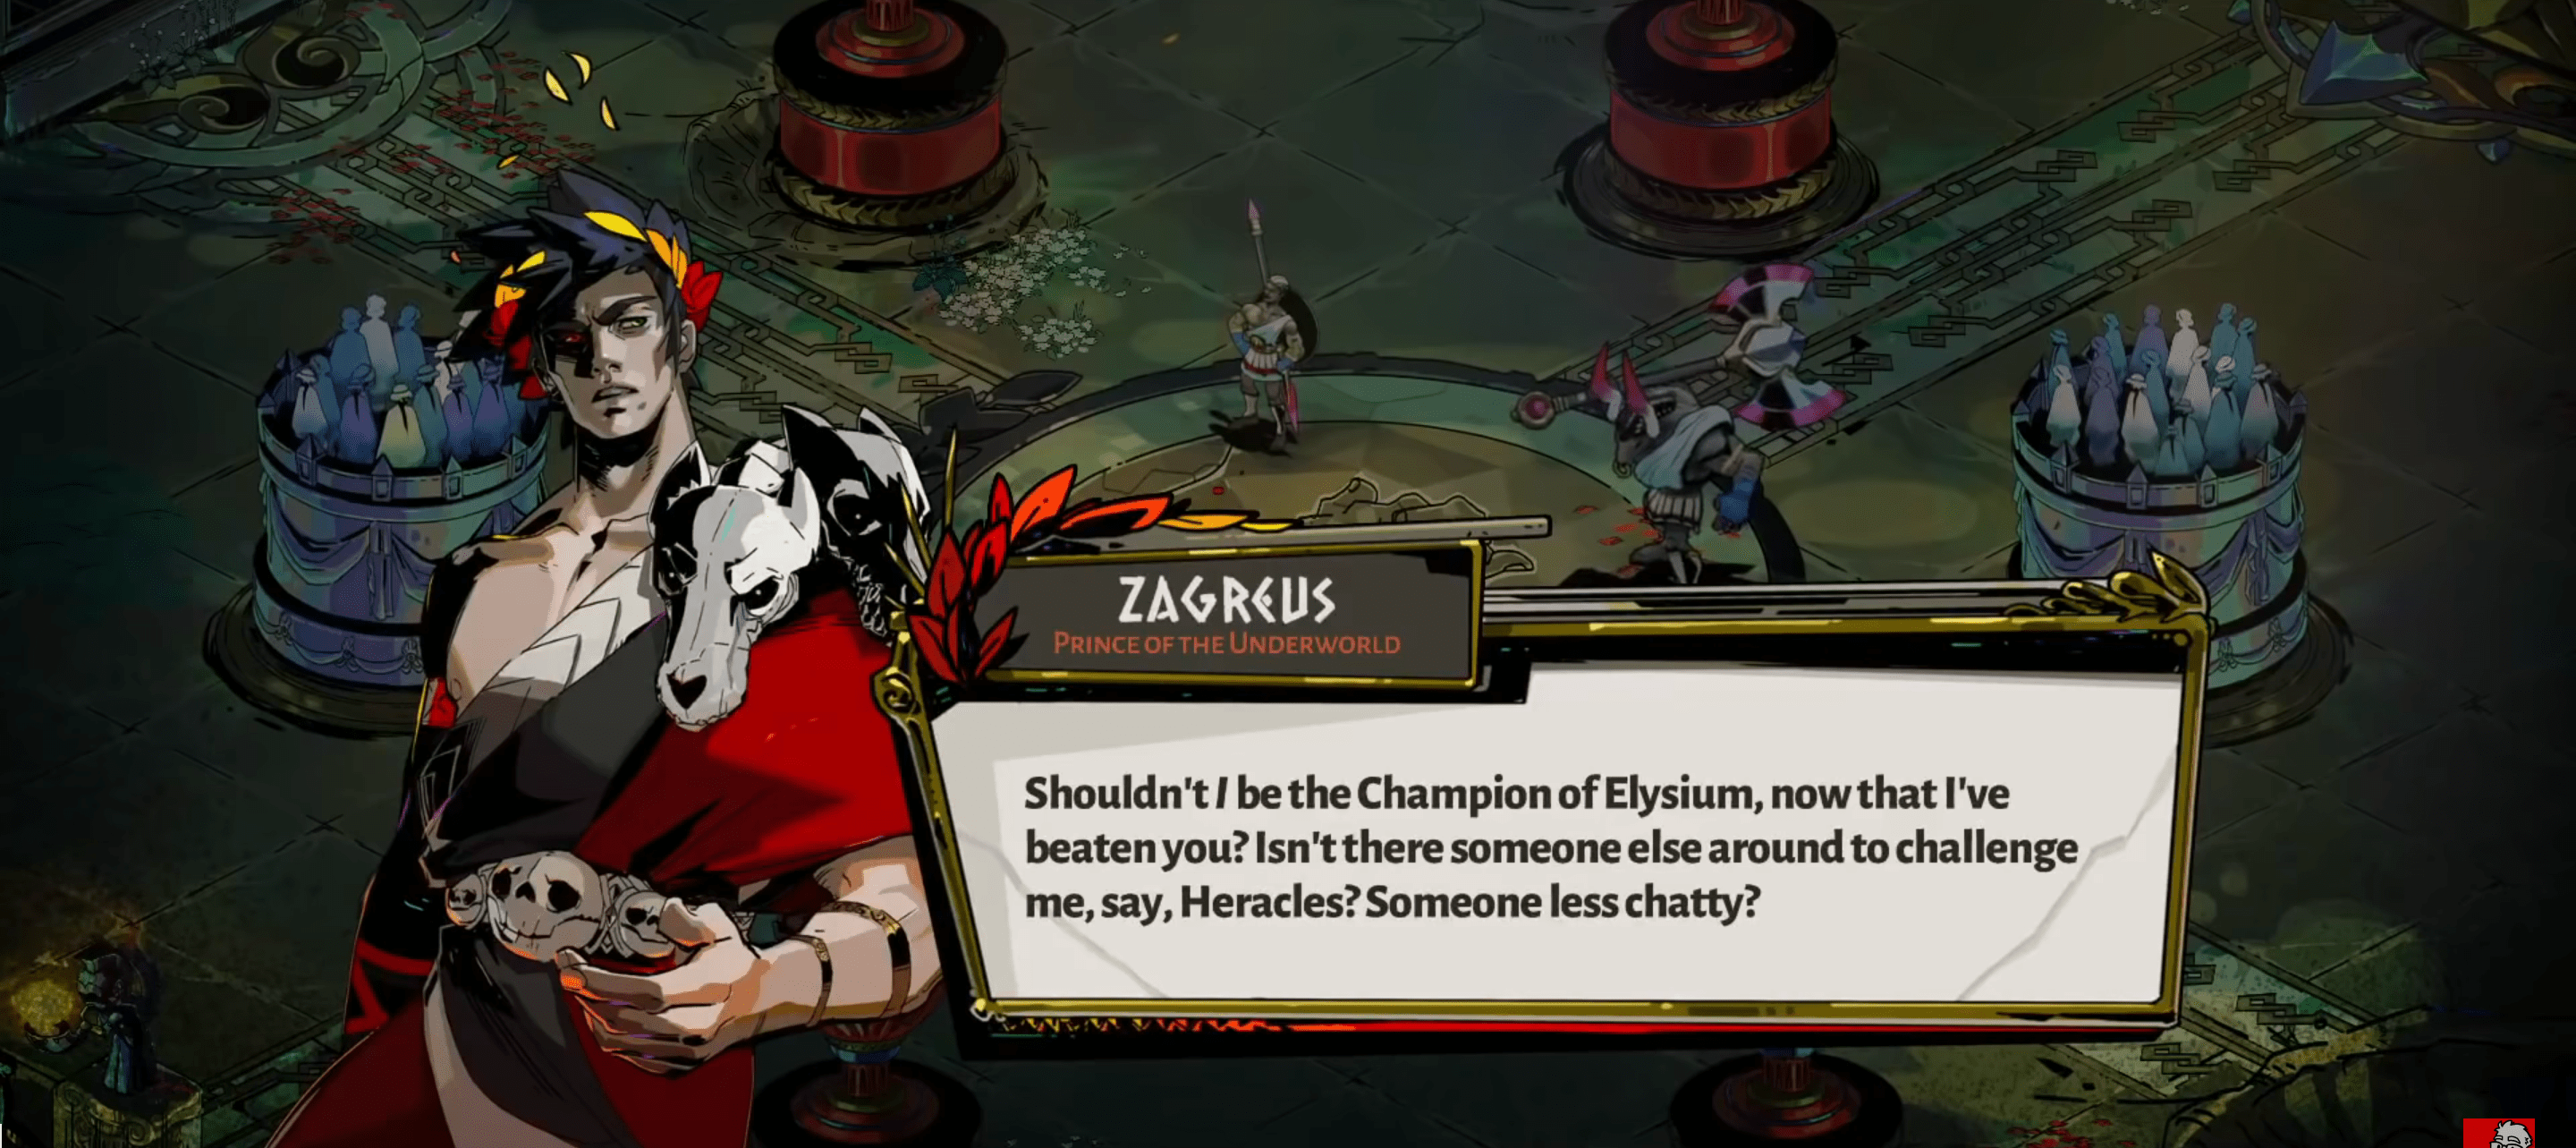 Zagreus, after learning Theseus is an idiot, commenting on how he beat him last time.